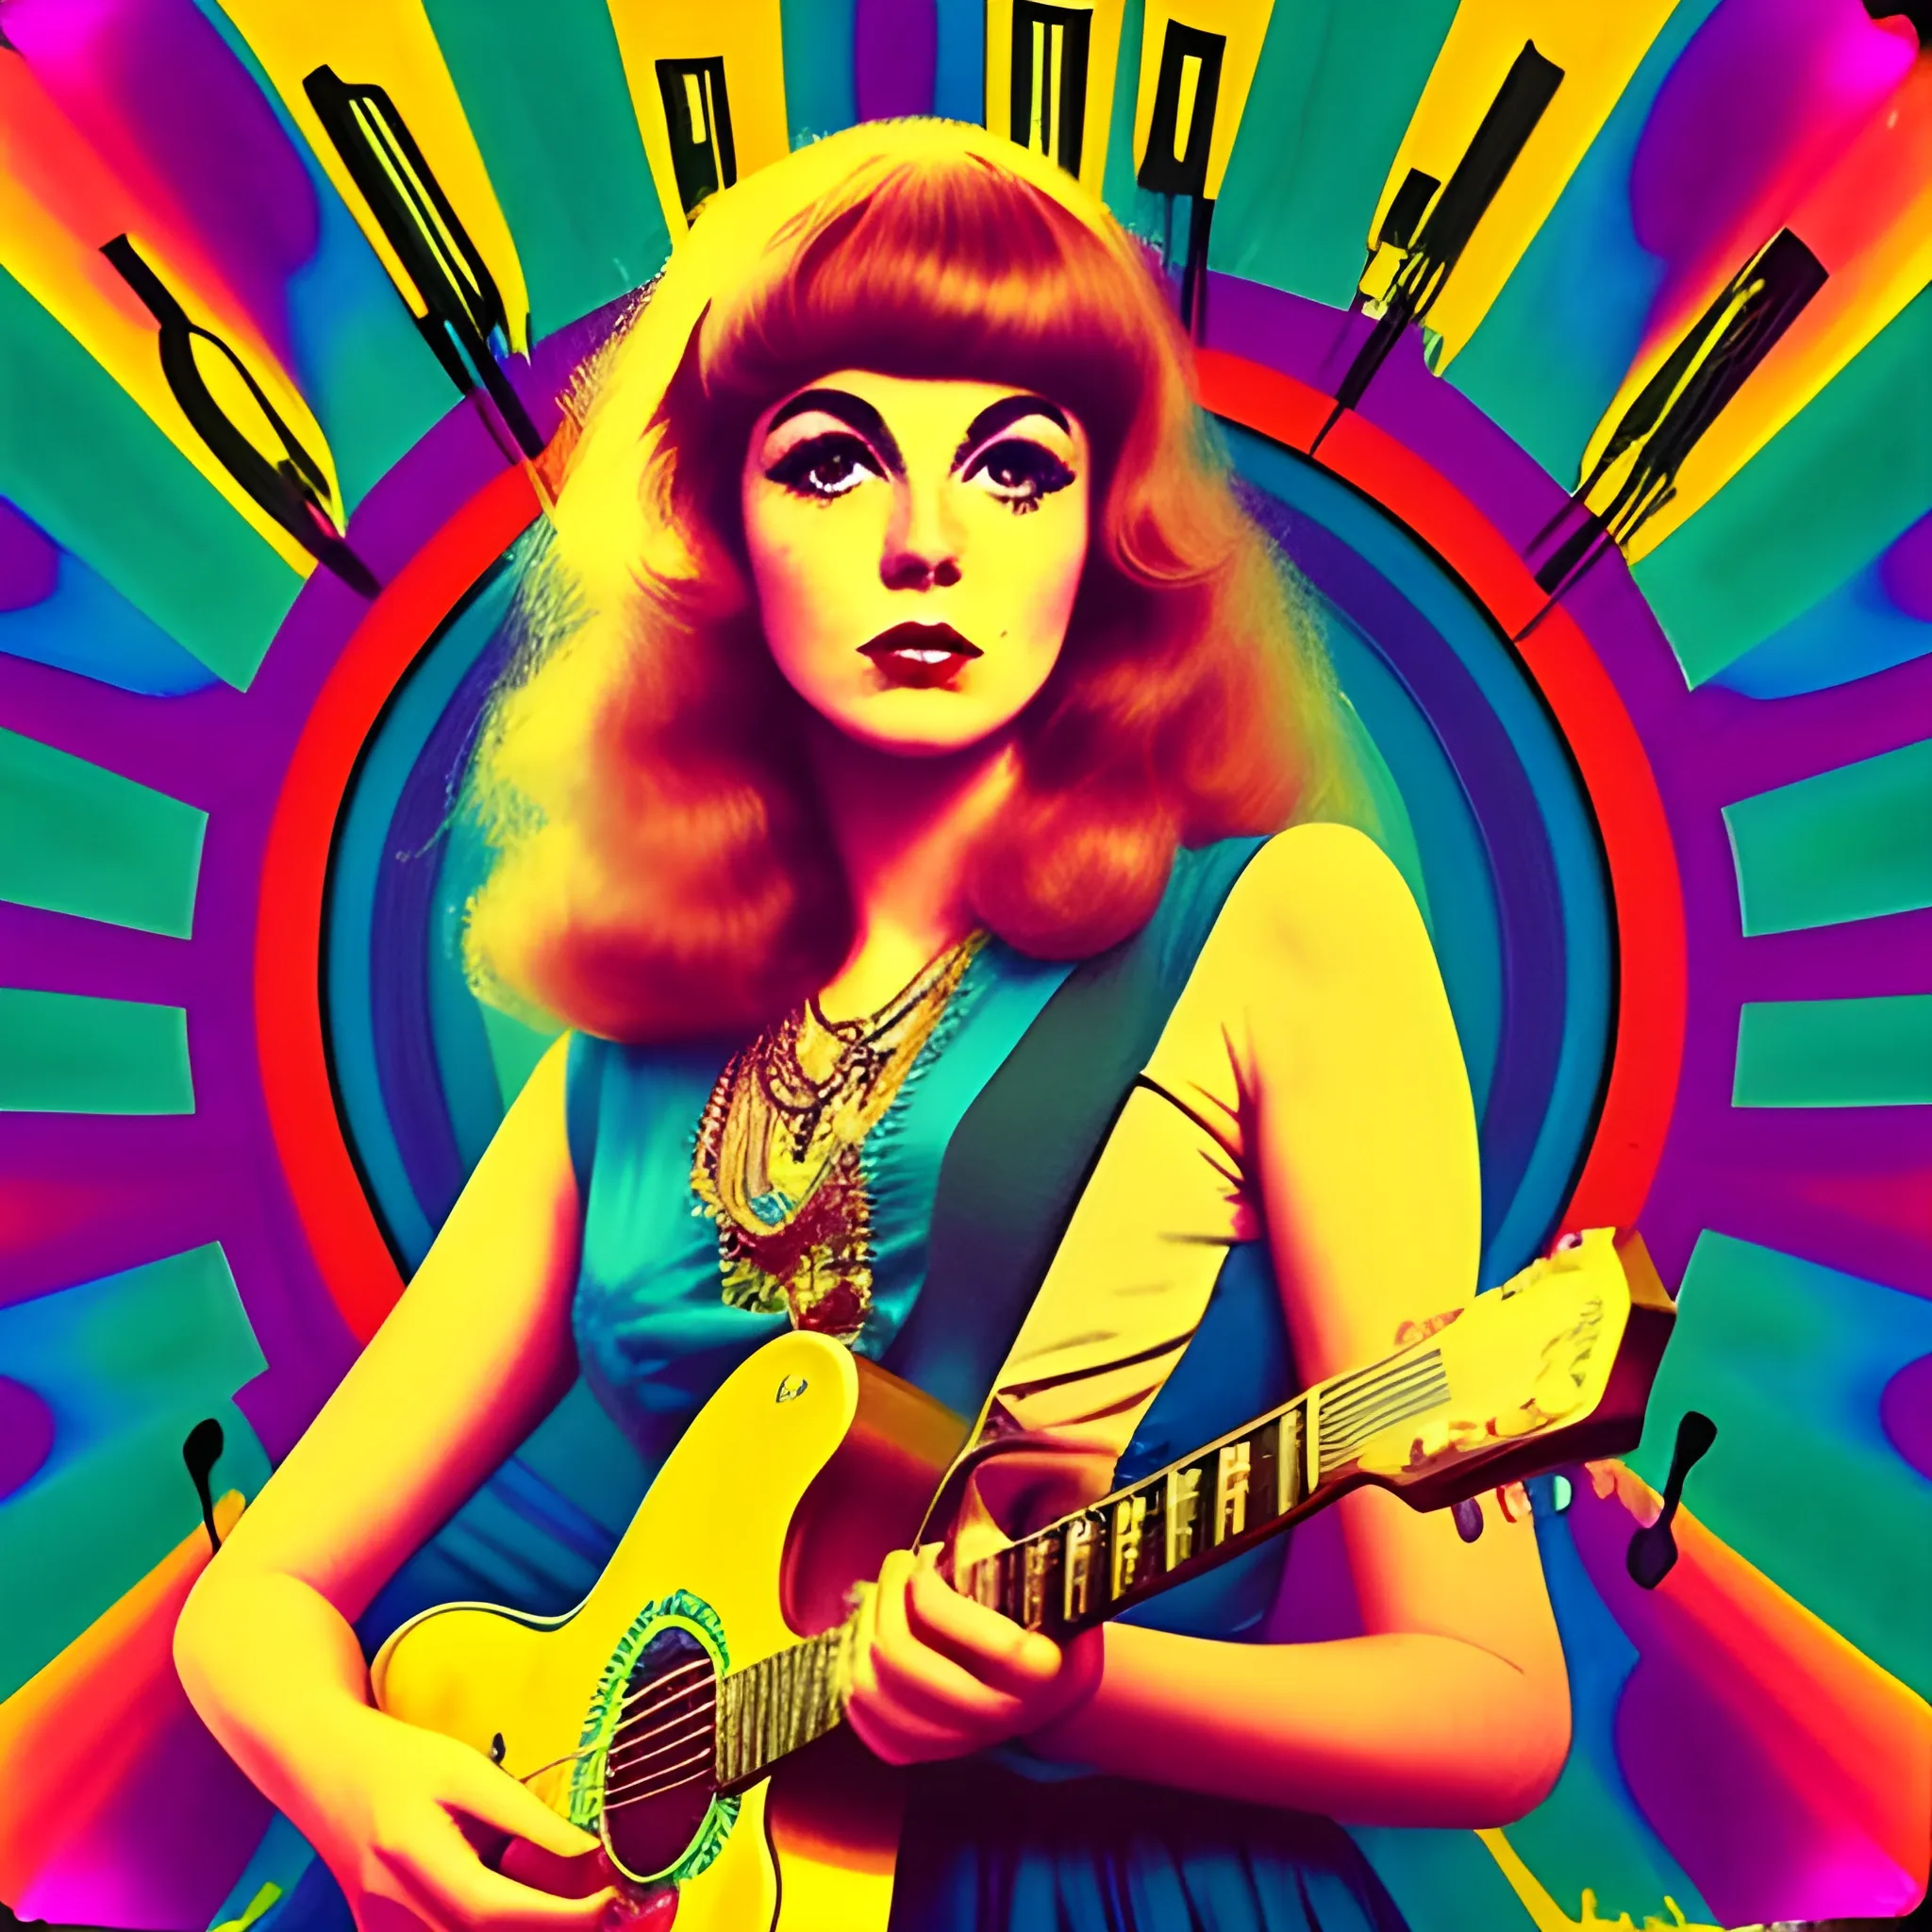 1960's, music album cover, hippy chick, psychedelic, guitar